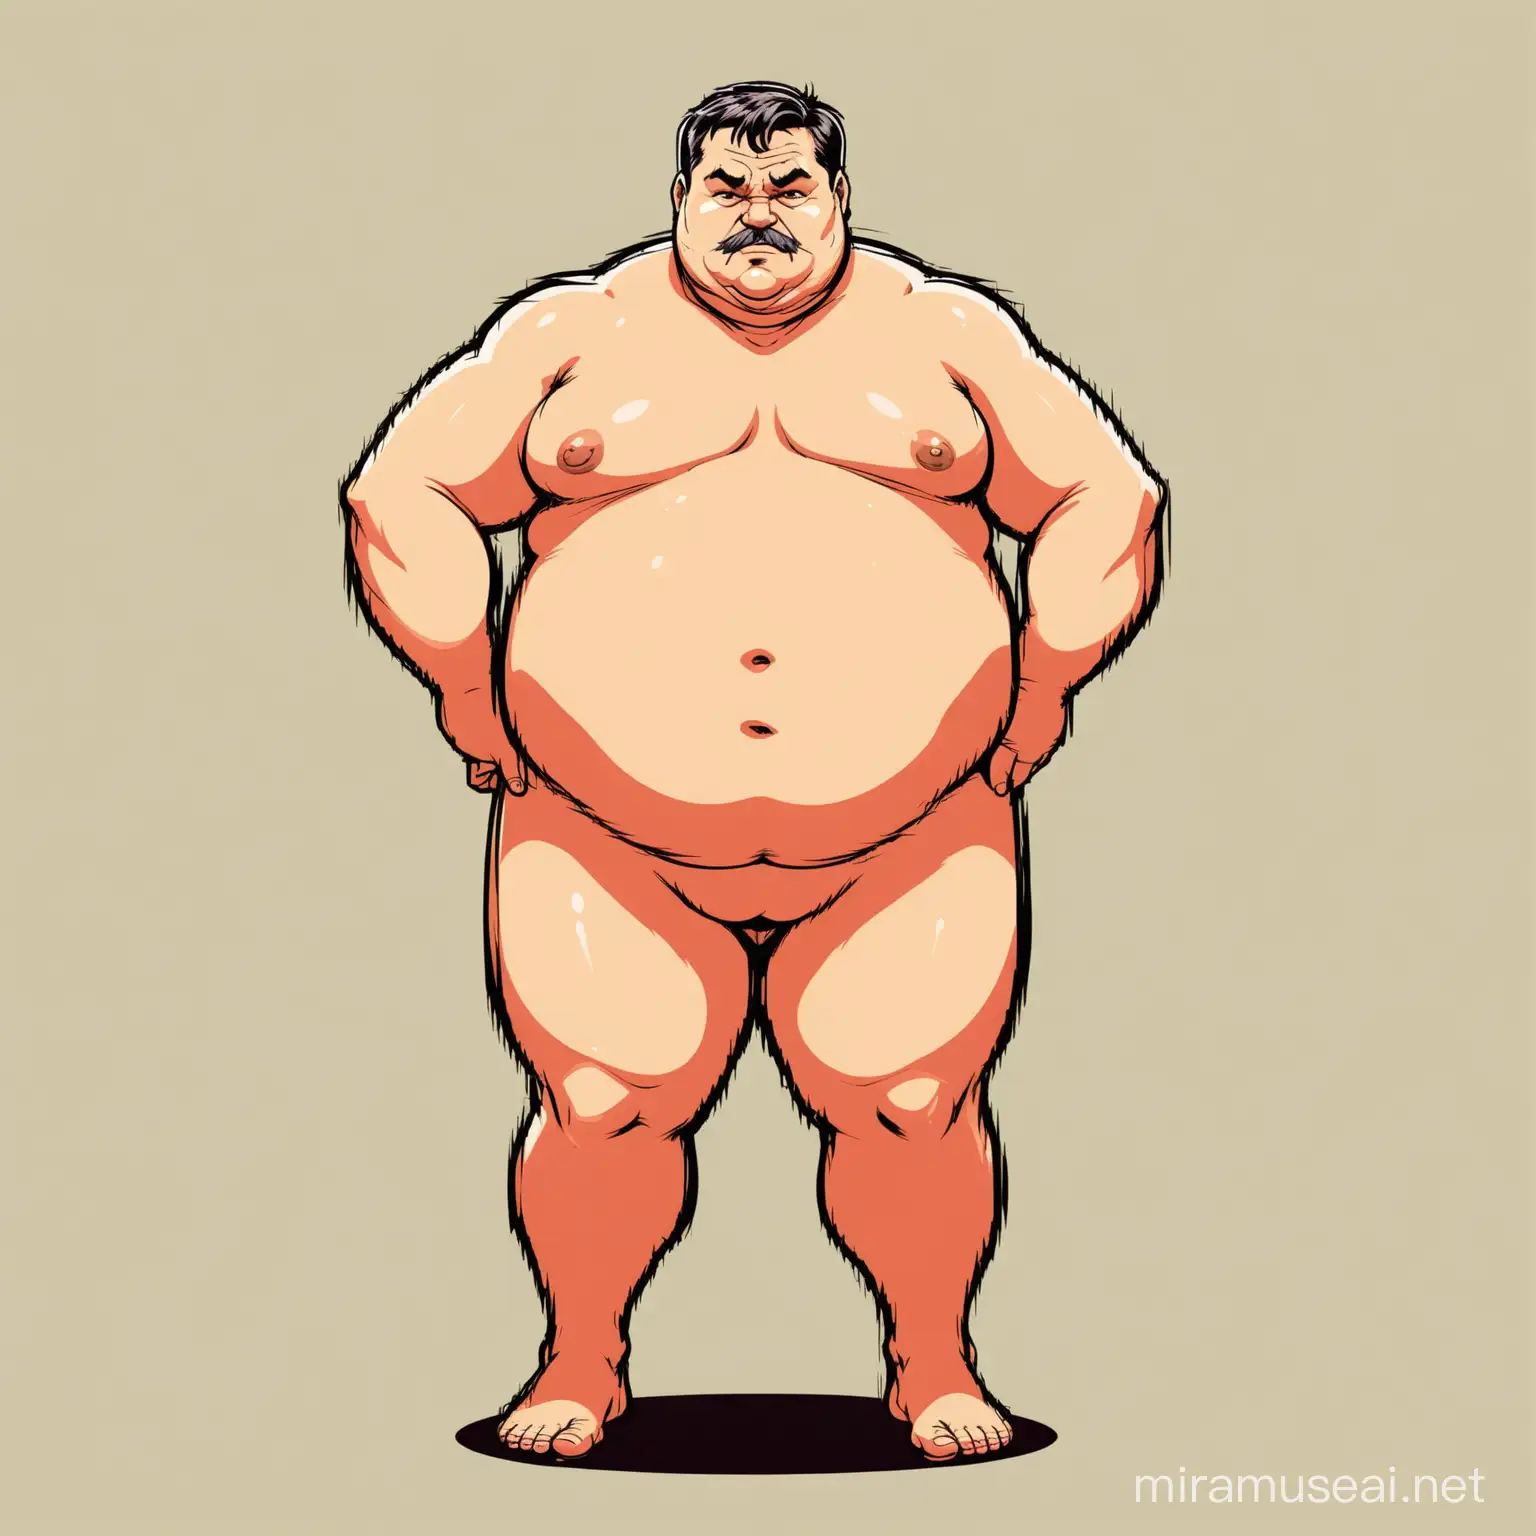 full body portrait of nude, fat, middle-aged man in comic style